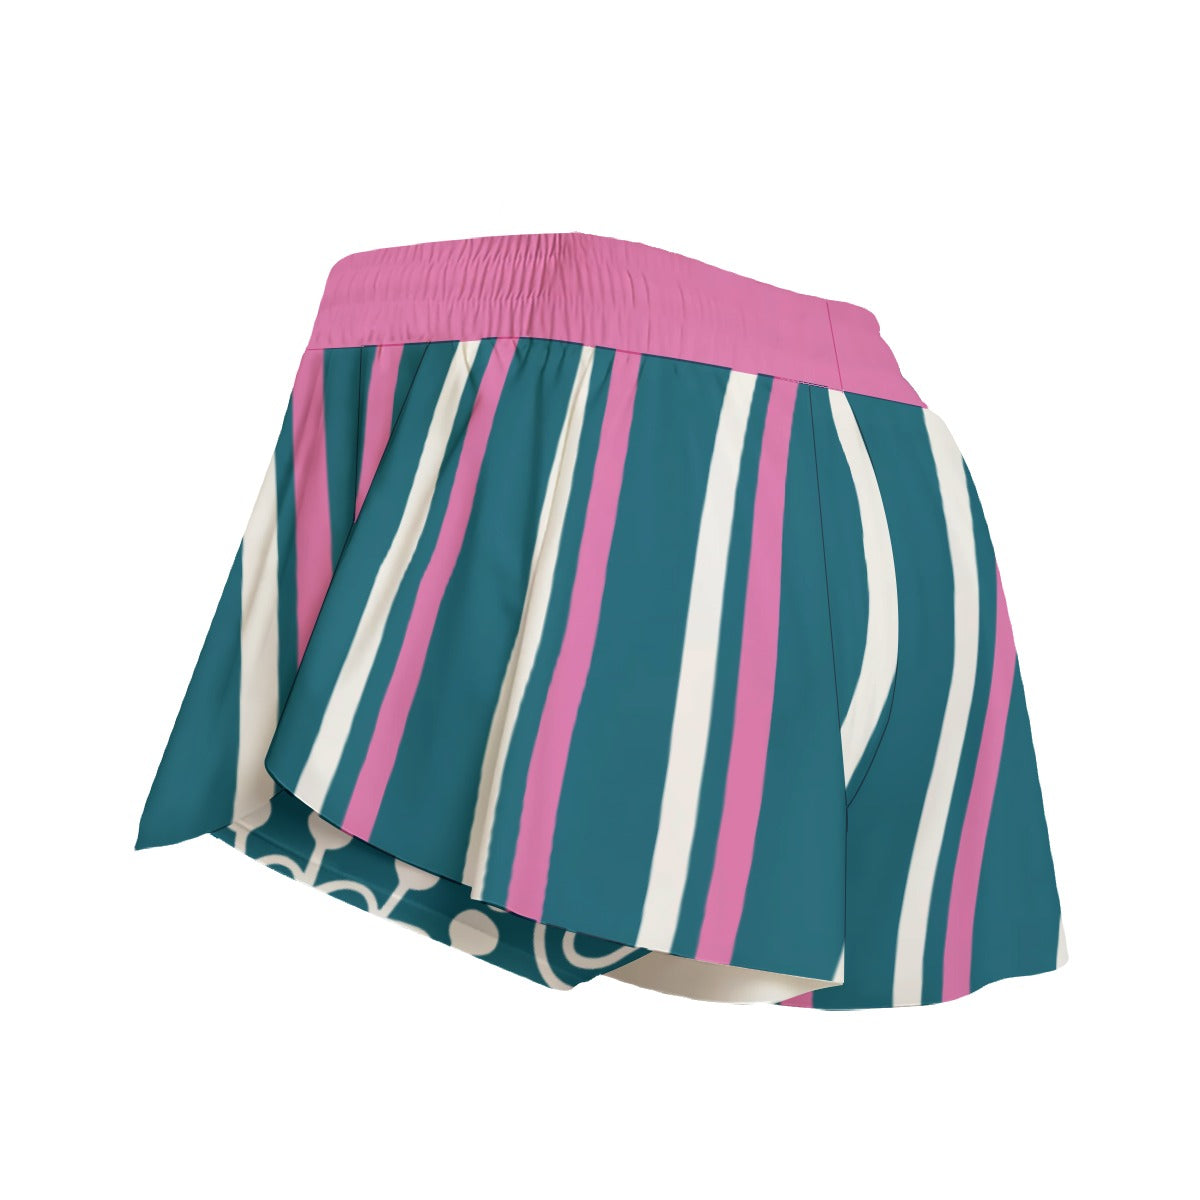 Dizzy Pickle Coming Up Daisies TP Stripes Pickleball Women's Sport Culottes Skorts with Inner Shorts and Pockets Peacock Pink